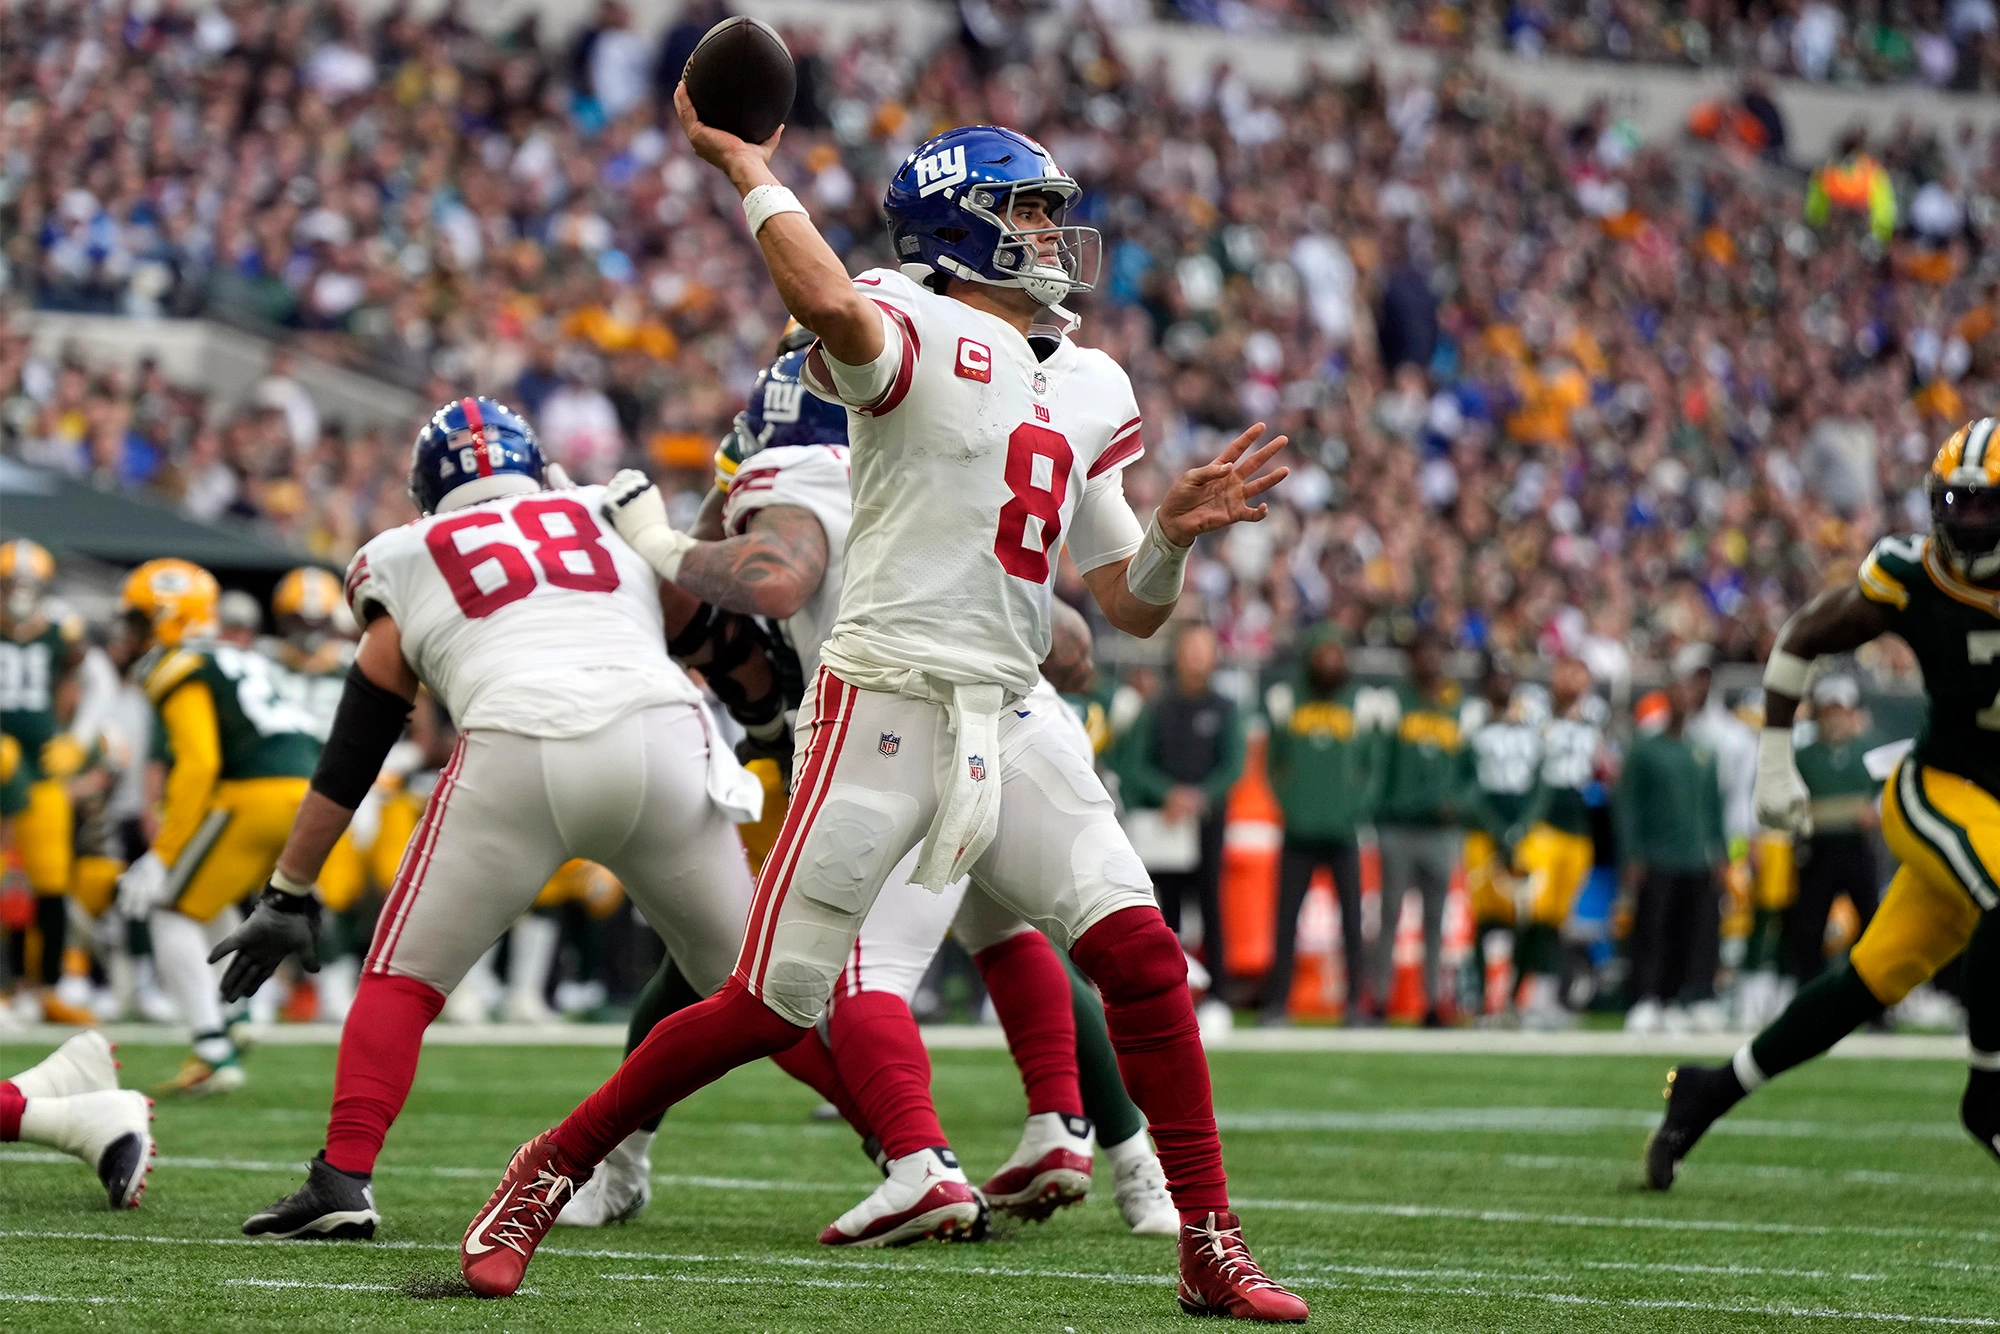 Giants beat the Packers